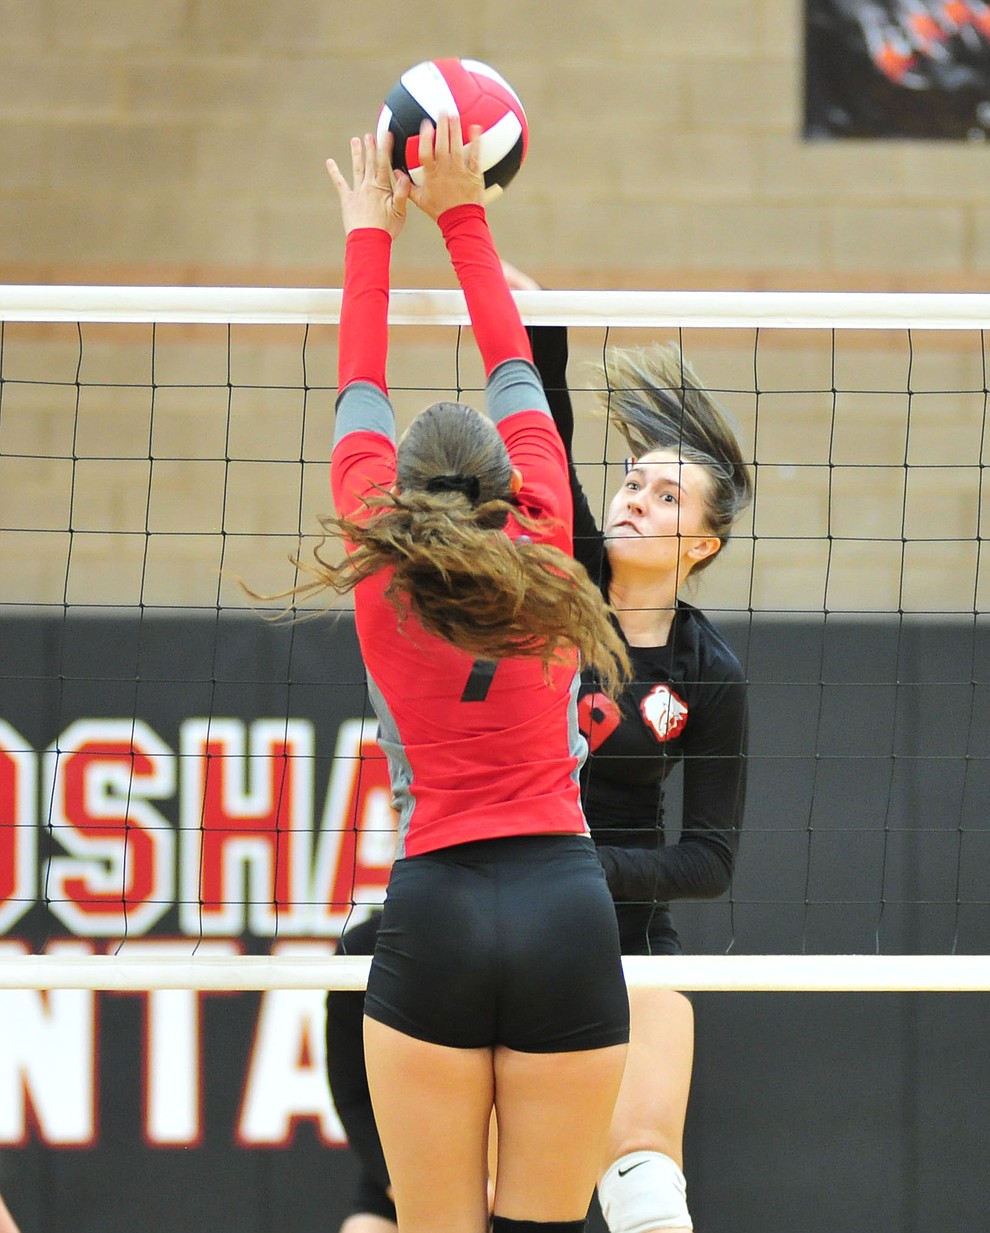 Bradshaw Mountain's Peyton Bradshaw goes for a kill as the Bears faced the Mingus Marauders in a volleyball matchup Tuesday, Sept. 11, 2018 in Prescott Valley. (Les Stukenberg/Courier)